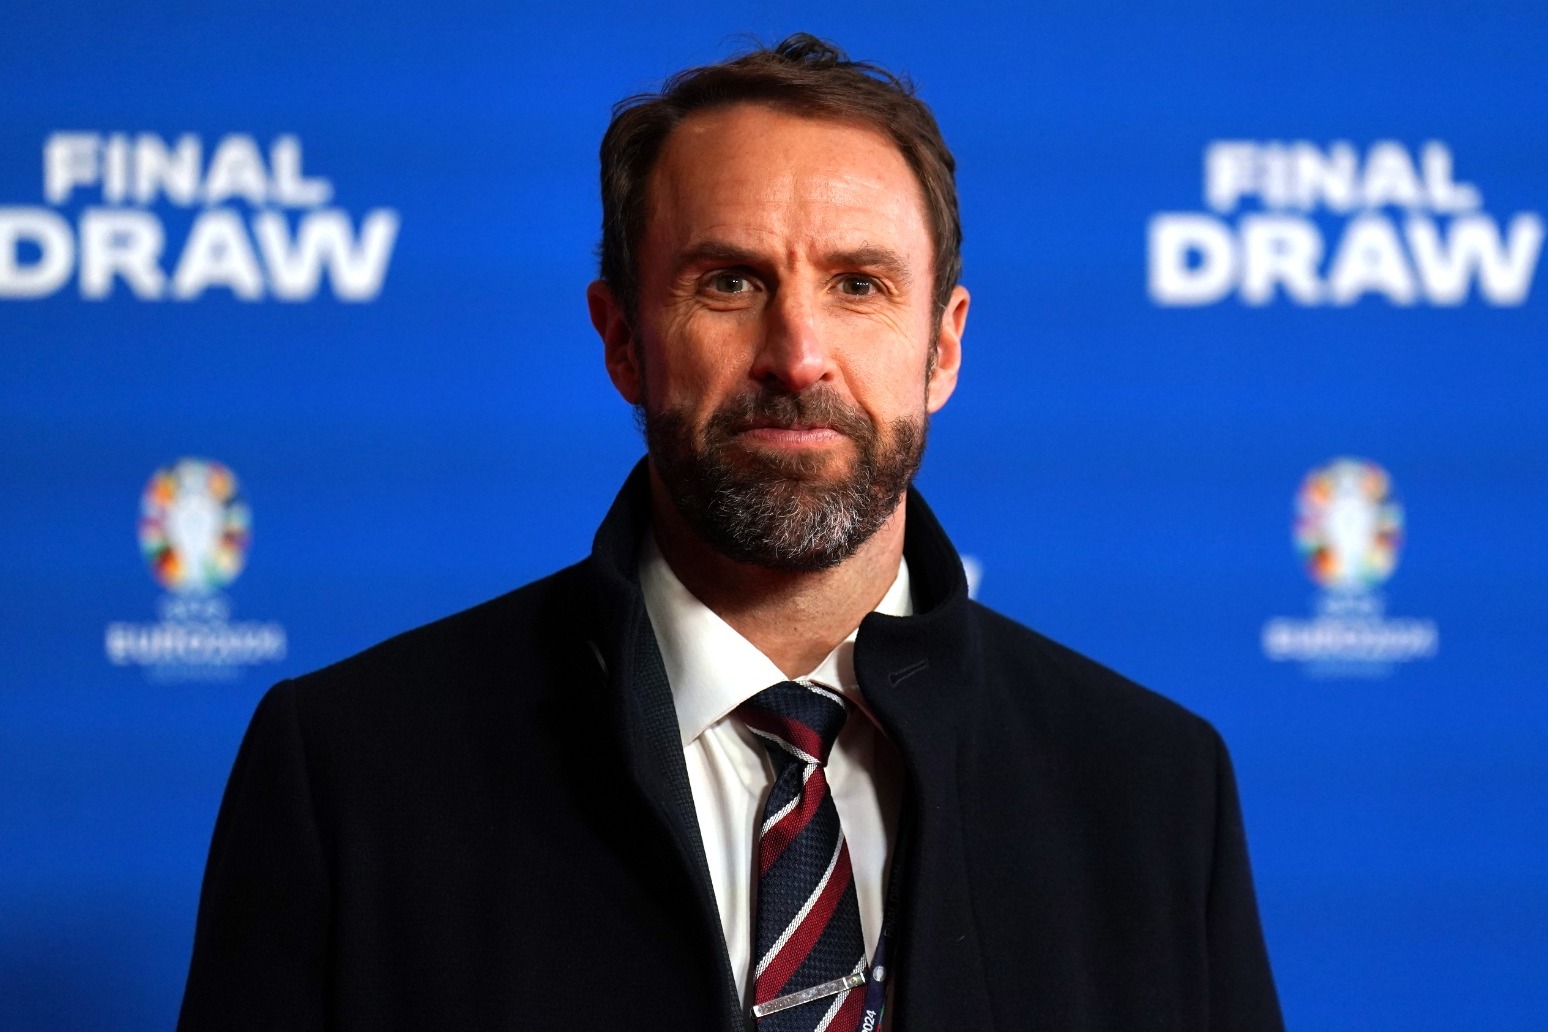 England’s men look to end major trophy drought at European Championship in 2024 